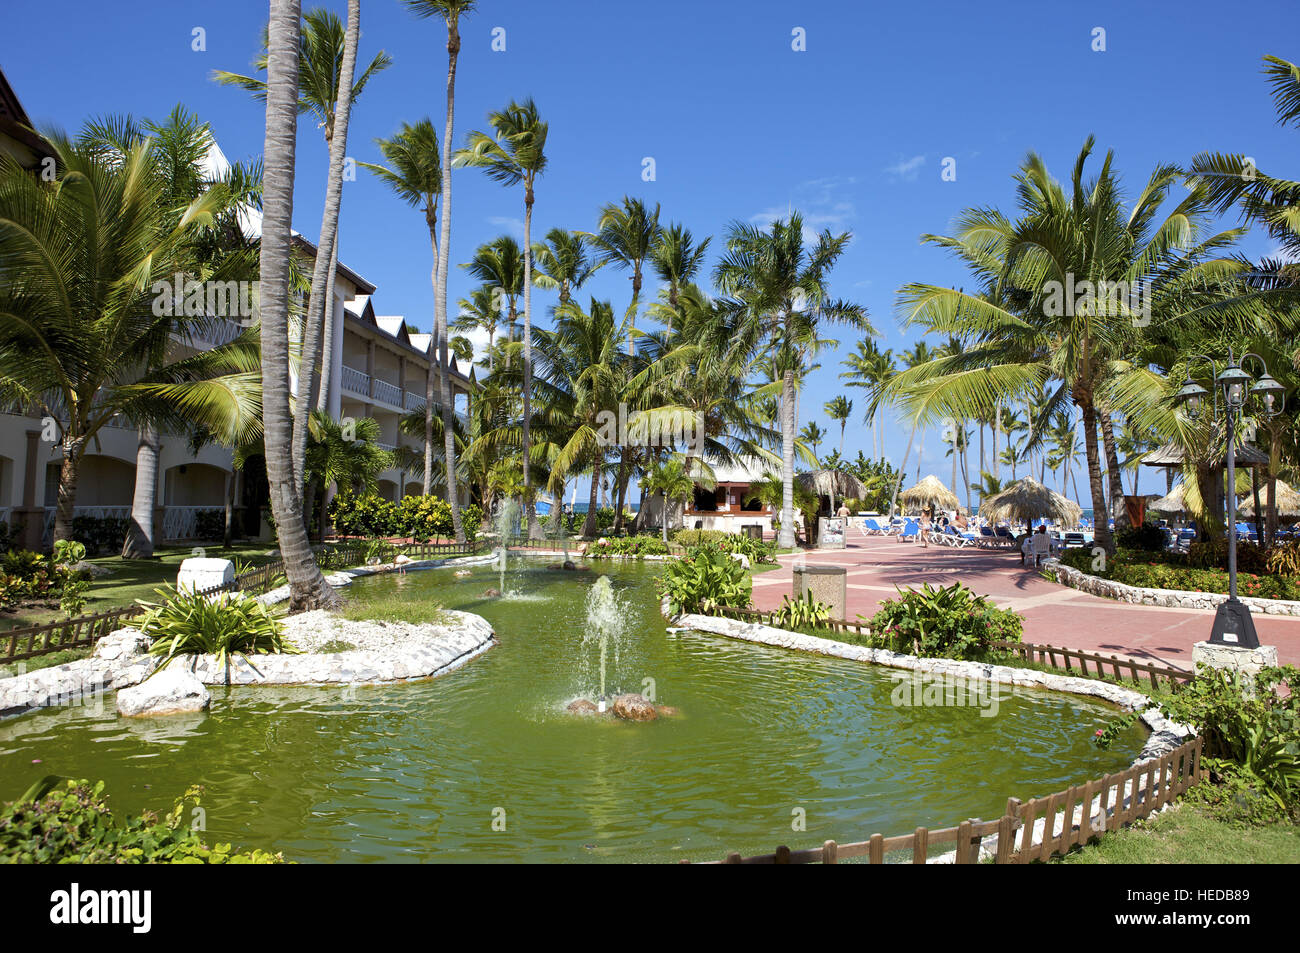 Pond, Grand Oasis Holiday Resort in Punta Cana, Dominican Republic, Caribbean Stock Photo